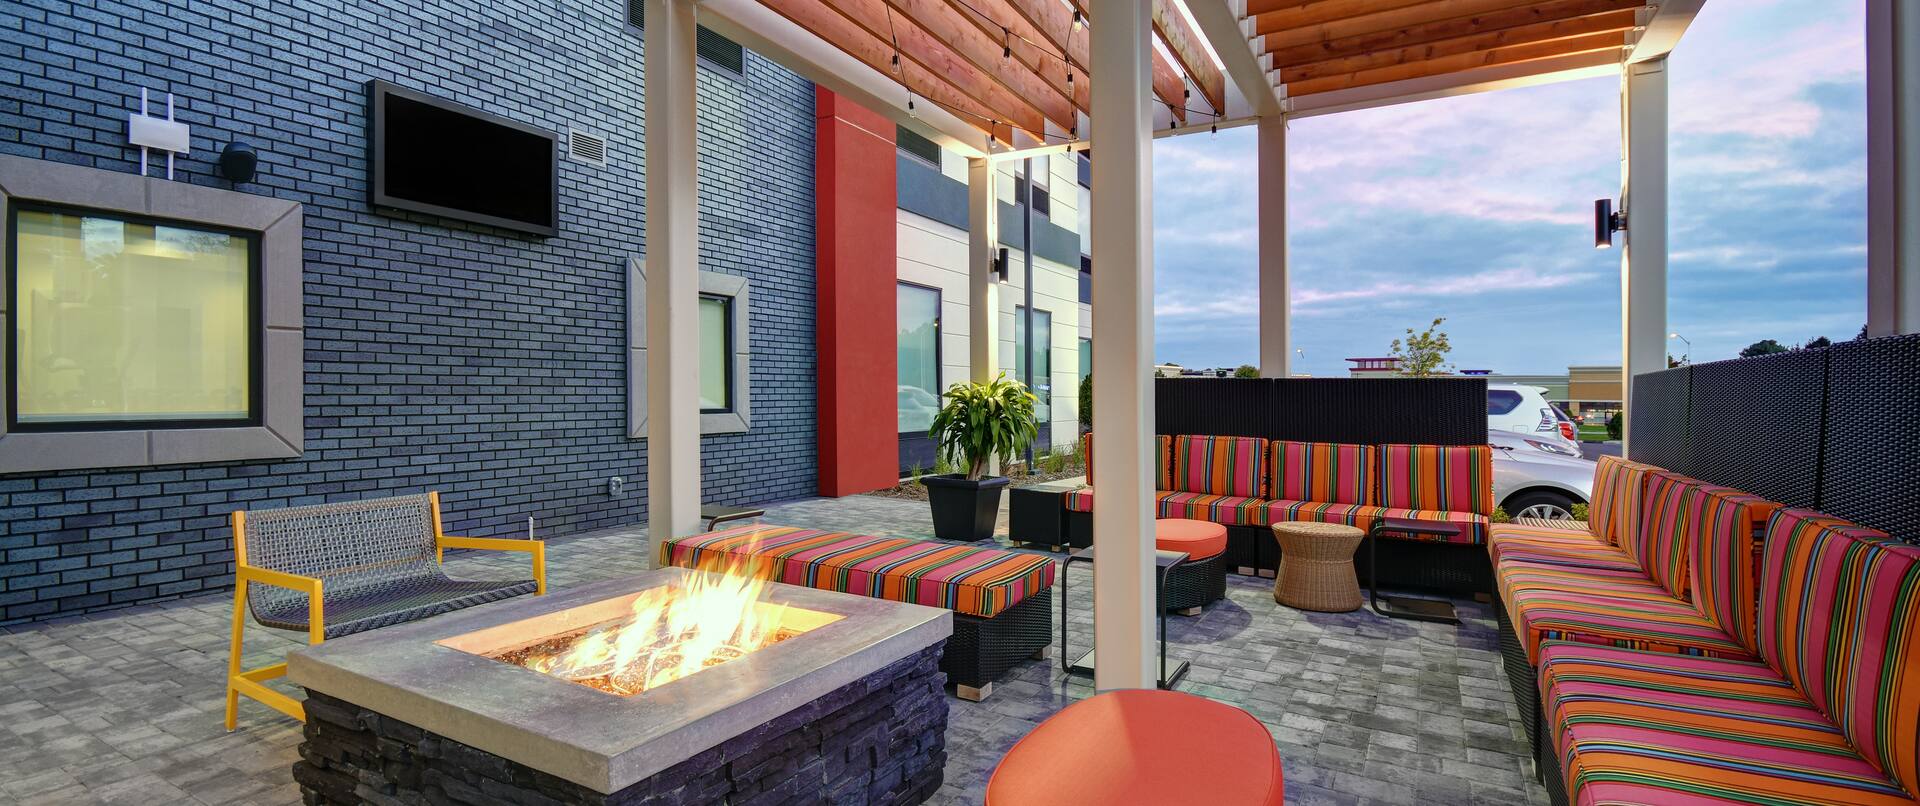 exterior patio with firepit